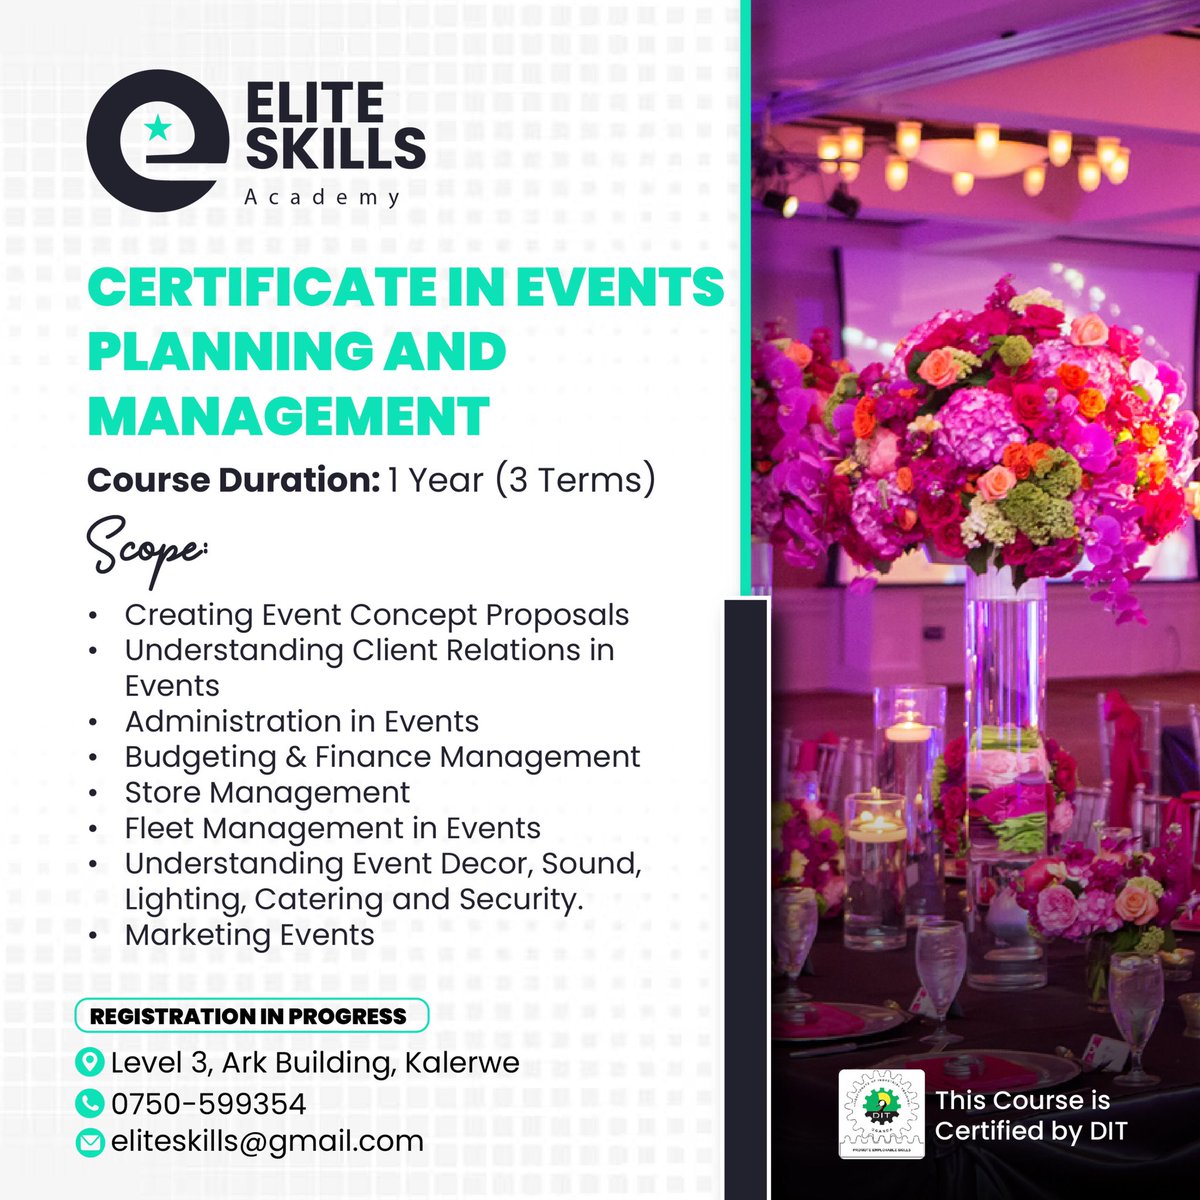 Turn your passion into a profession and create unforgettable experiences. Call or WhatsApp 0750-599-354 #eventsmanagement